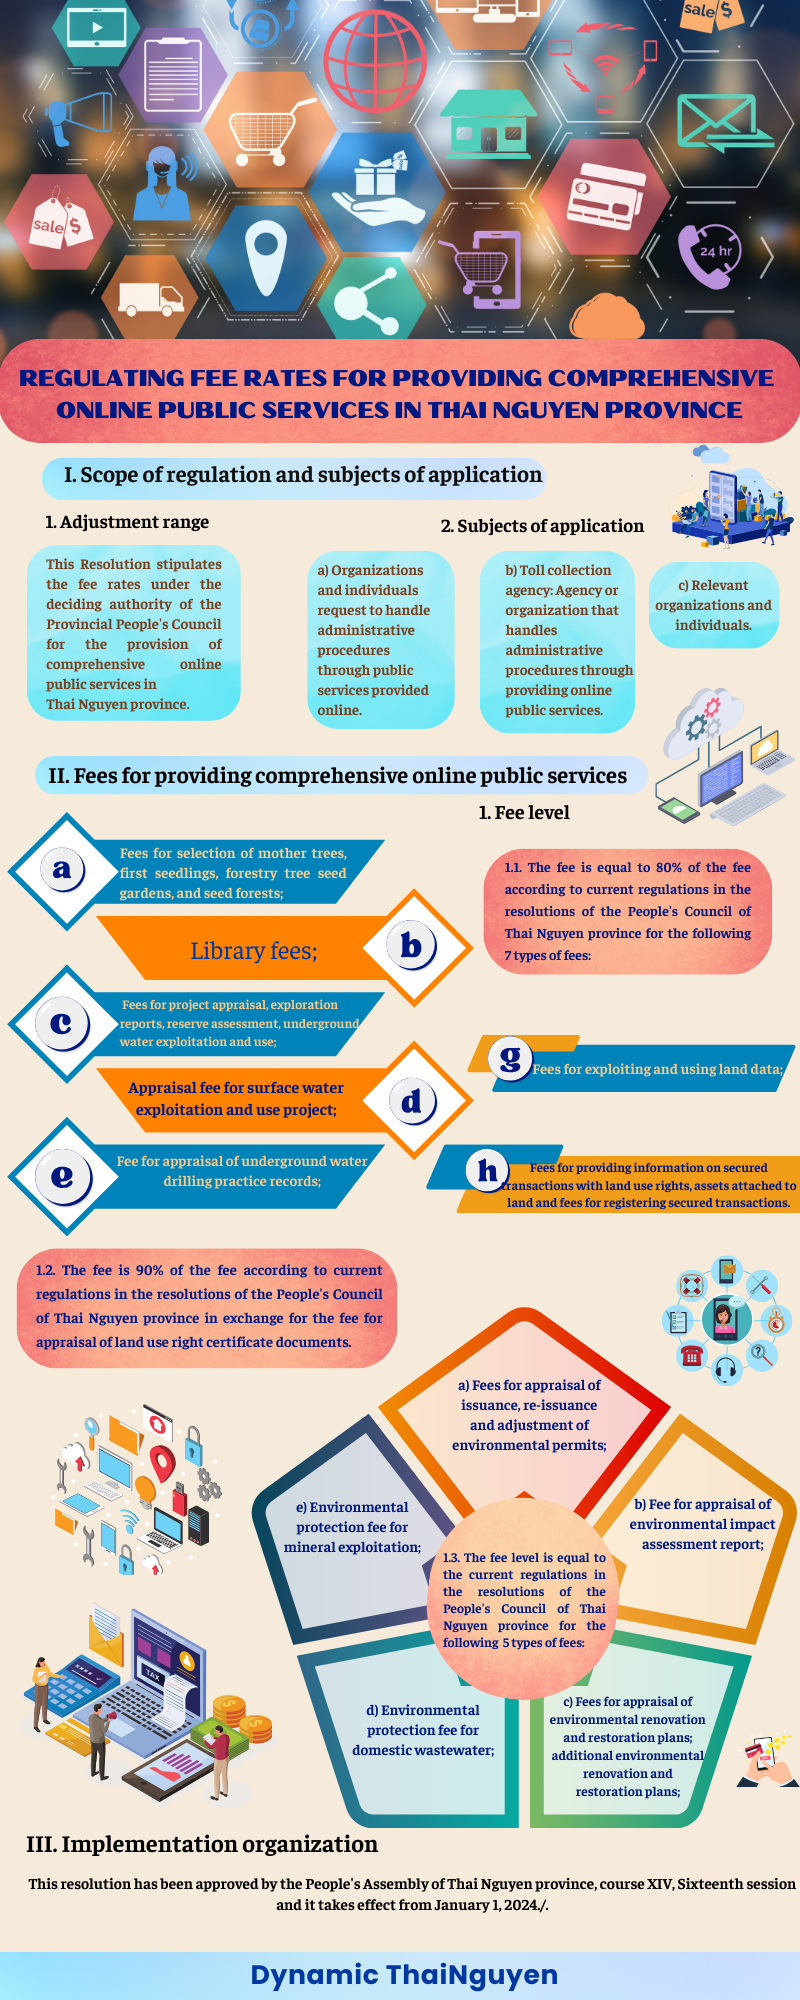 [INFOGRAPHIC] Regulating fee rates for providing comprehensive online public services in Thai Nguyen province